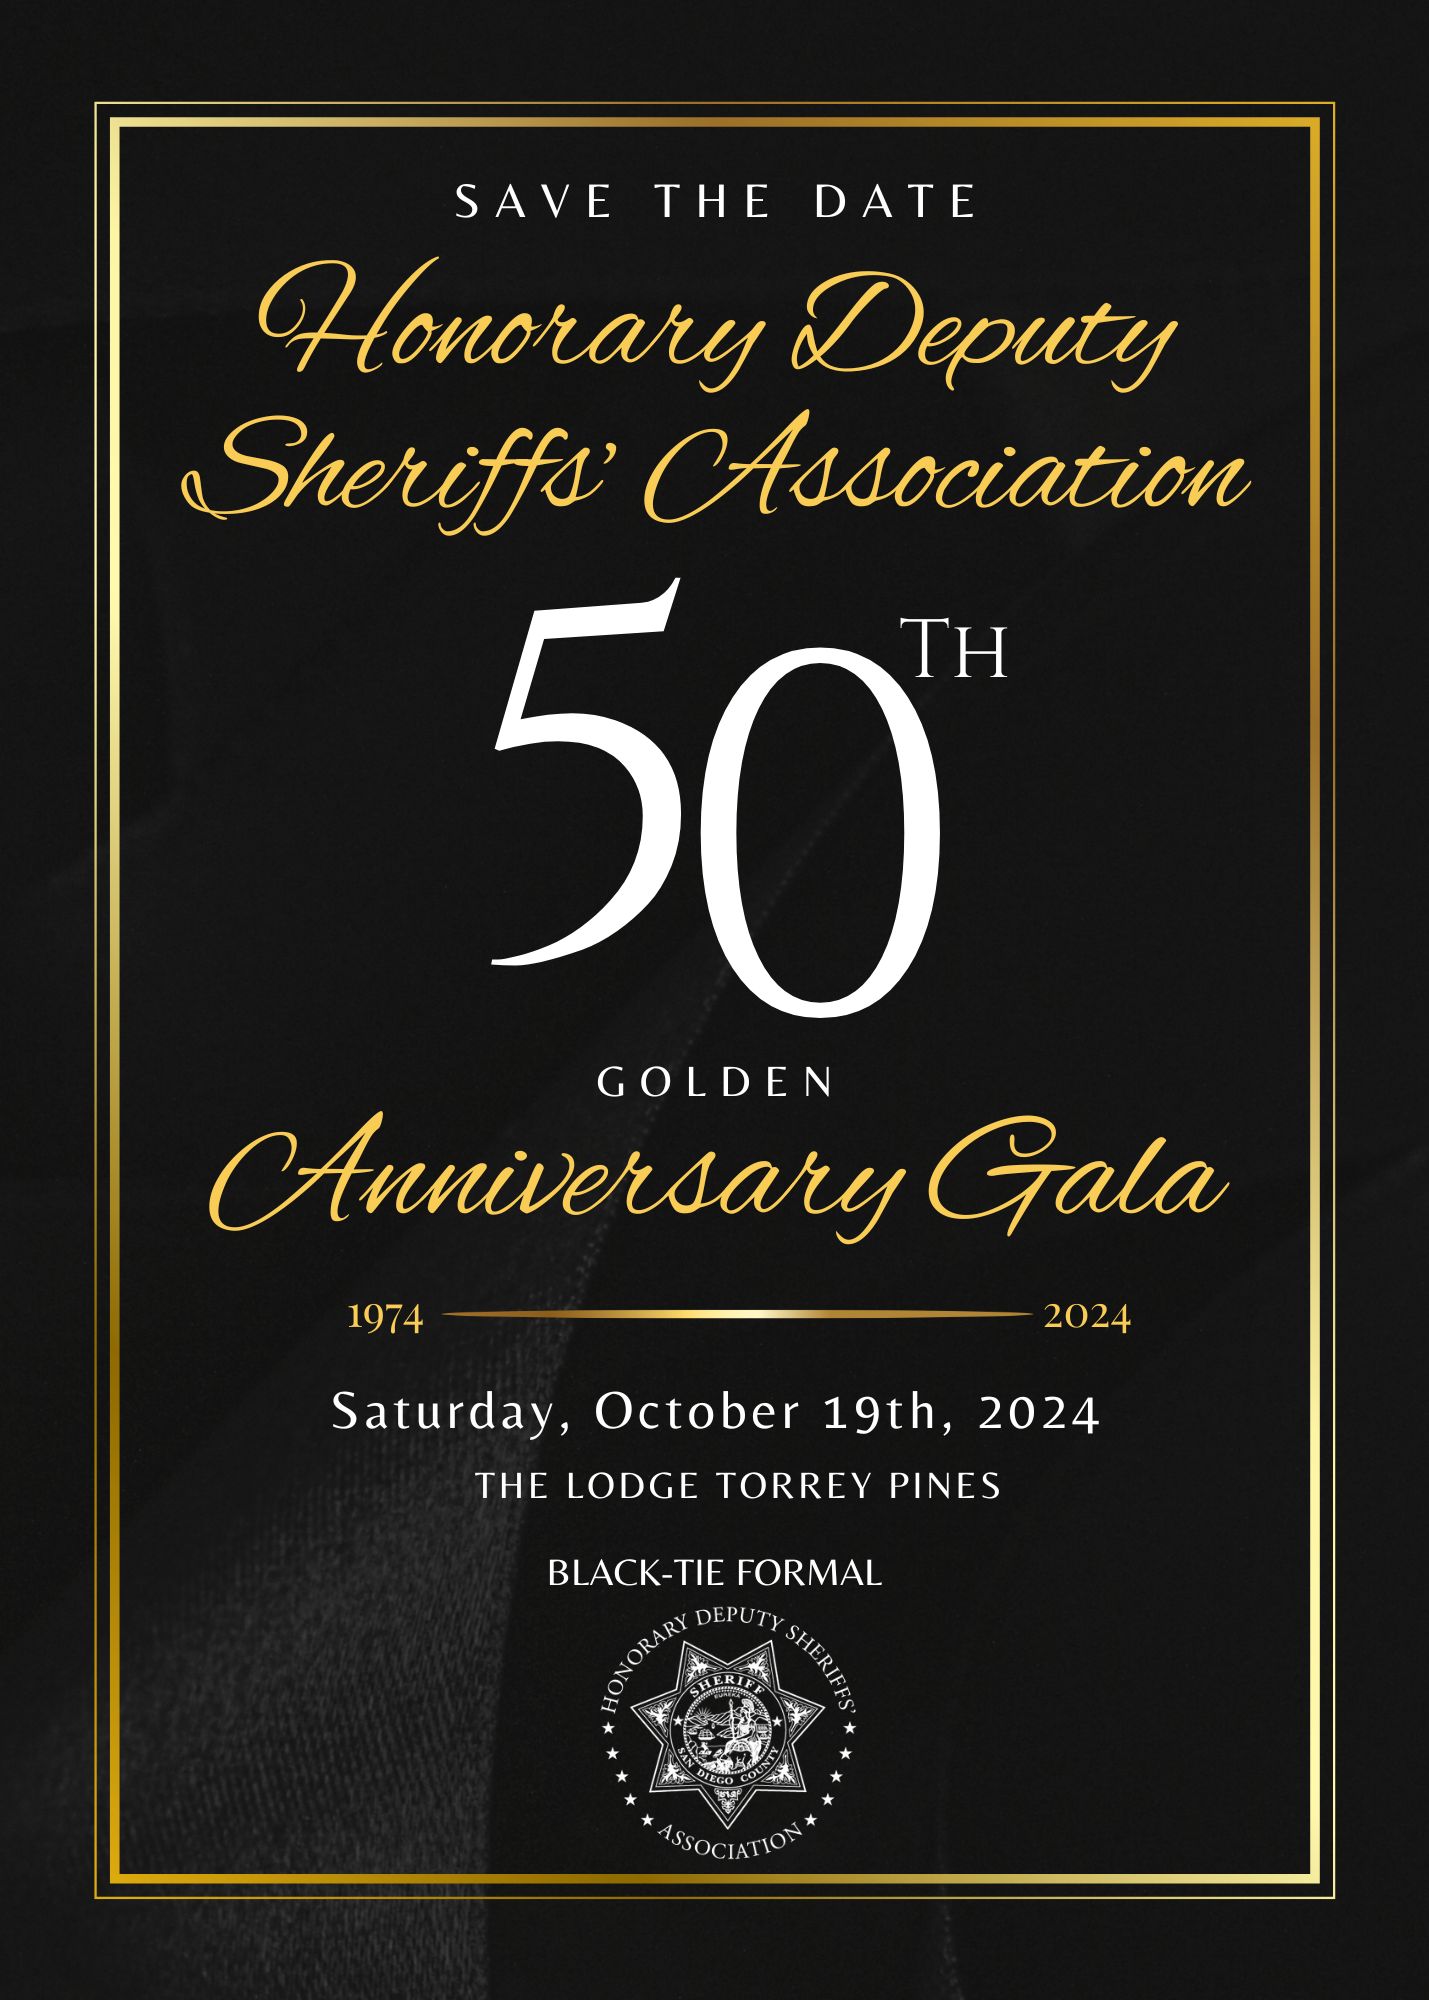 50th Anniversary Gala Save The Date Flier